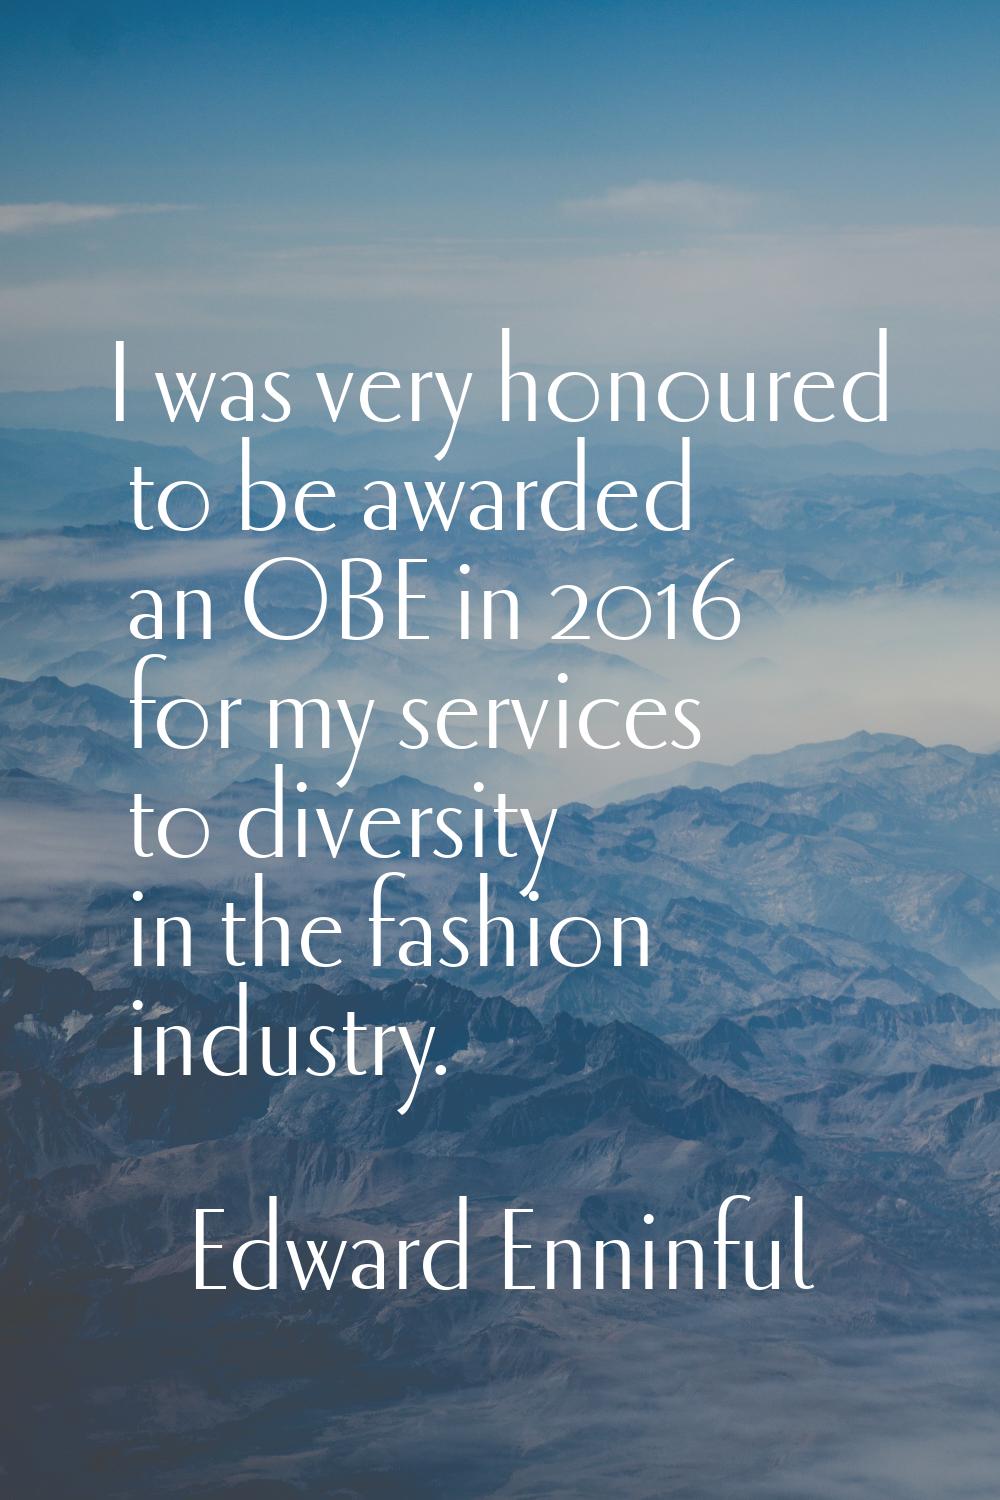 I was very honoured to be awarded an OBE in 2016 for my services to diversity in the fashion indust